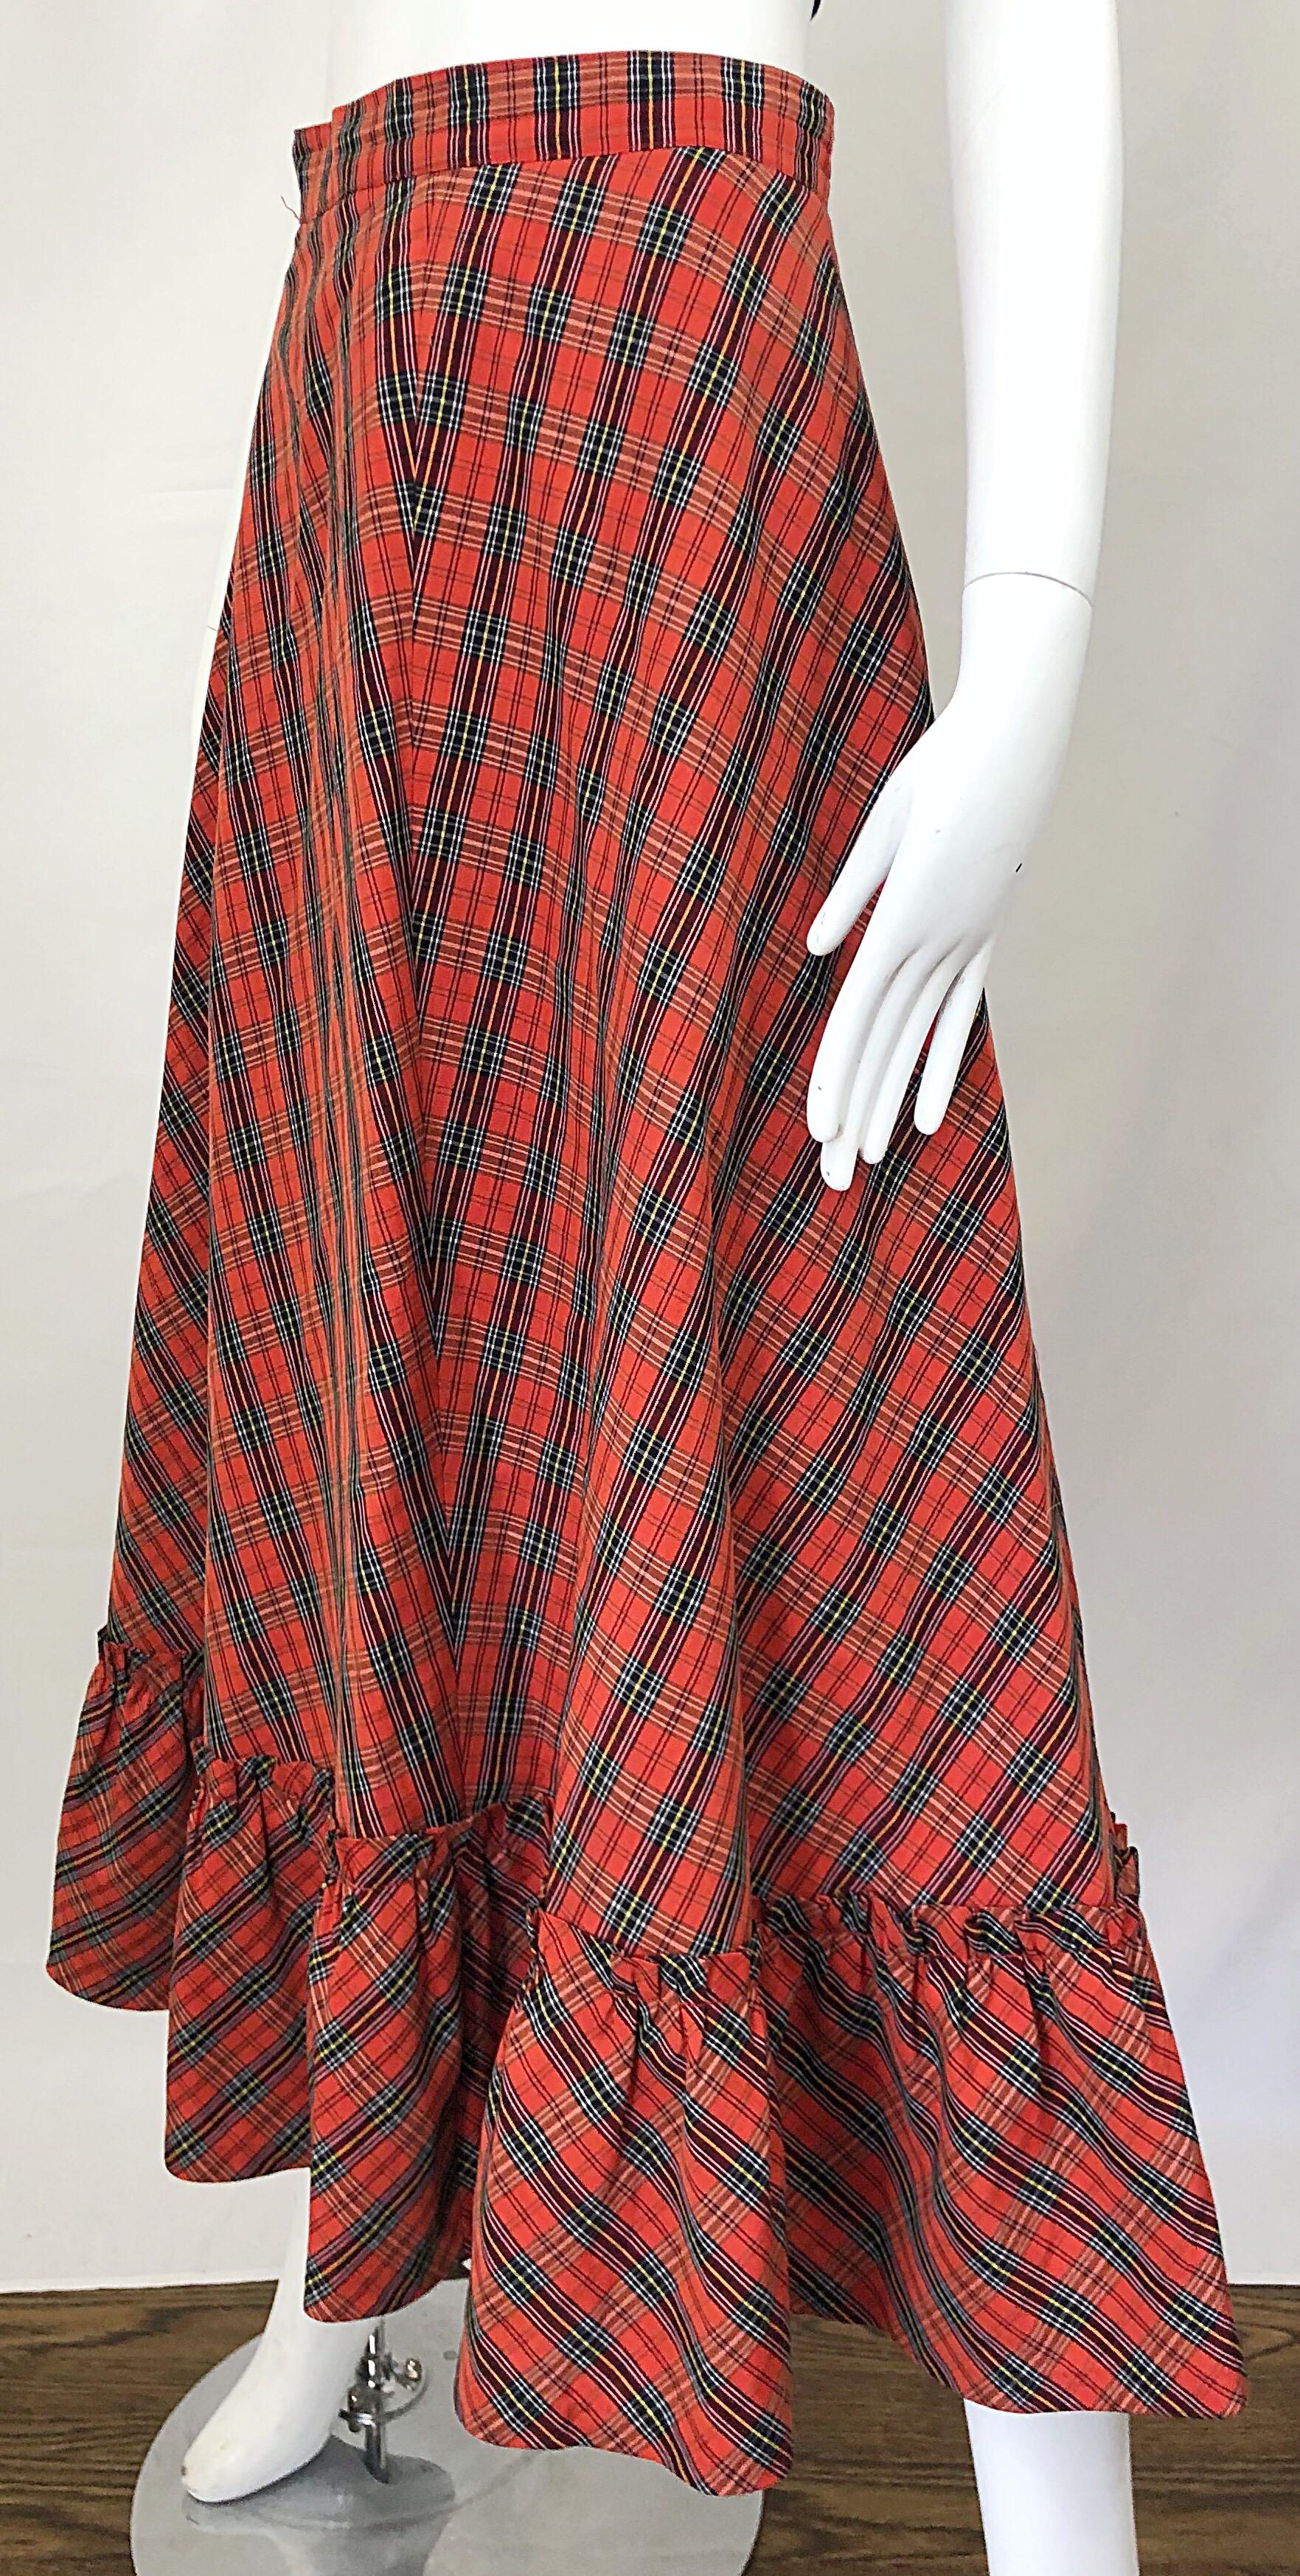 1970s Red Plaid Cotton Voile Ruffled Hem Vintage 70s Maxi Skirt In Excellent Condition For Sale In San Diego, CA